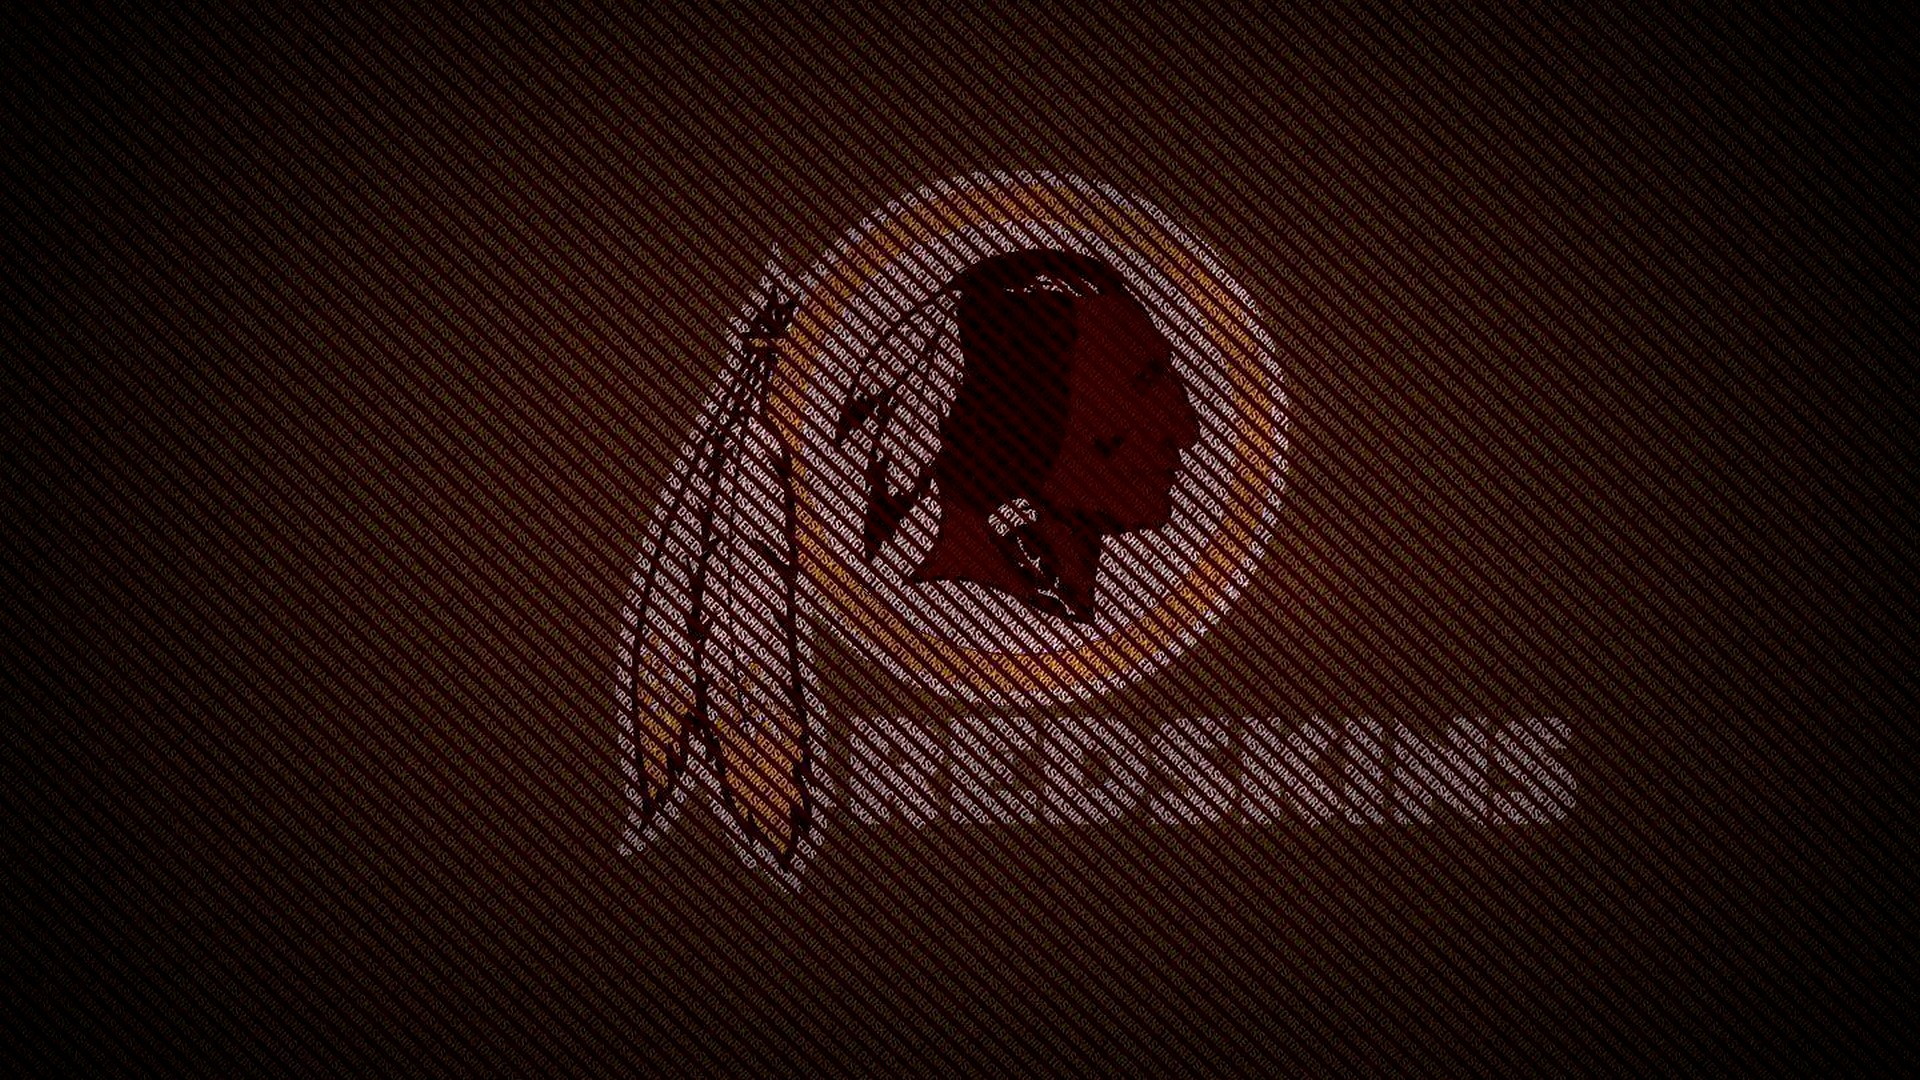 Best Washington Redskins Wallpaper with high-resolution 1920x1080 pixel. You can use and set as wallpaper for Notebook Screensavers, Mac Wallpapers, Mobile Home Screen, iPhone or Android Phones Lock Screen